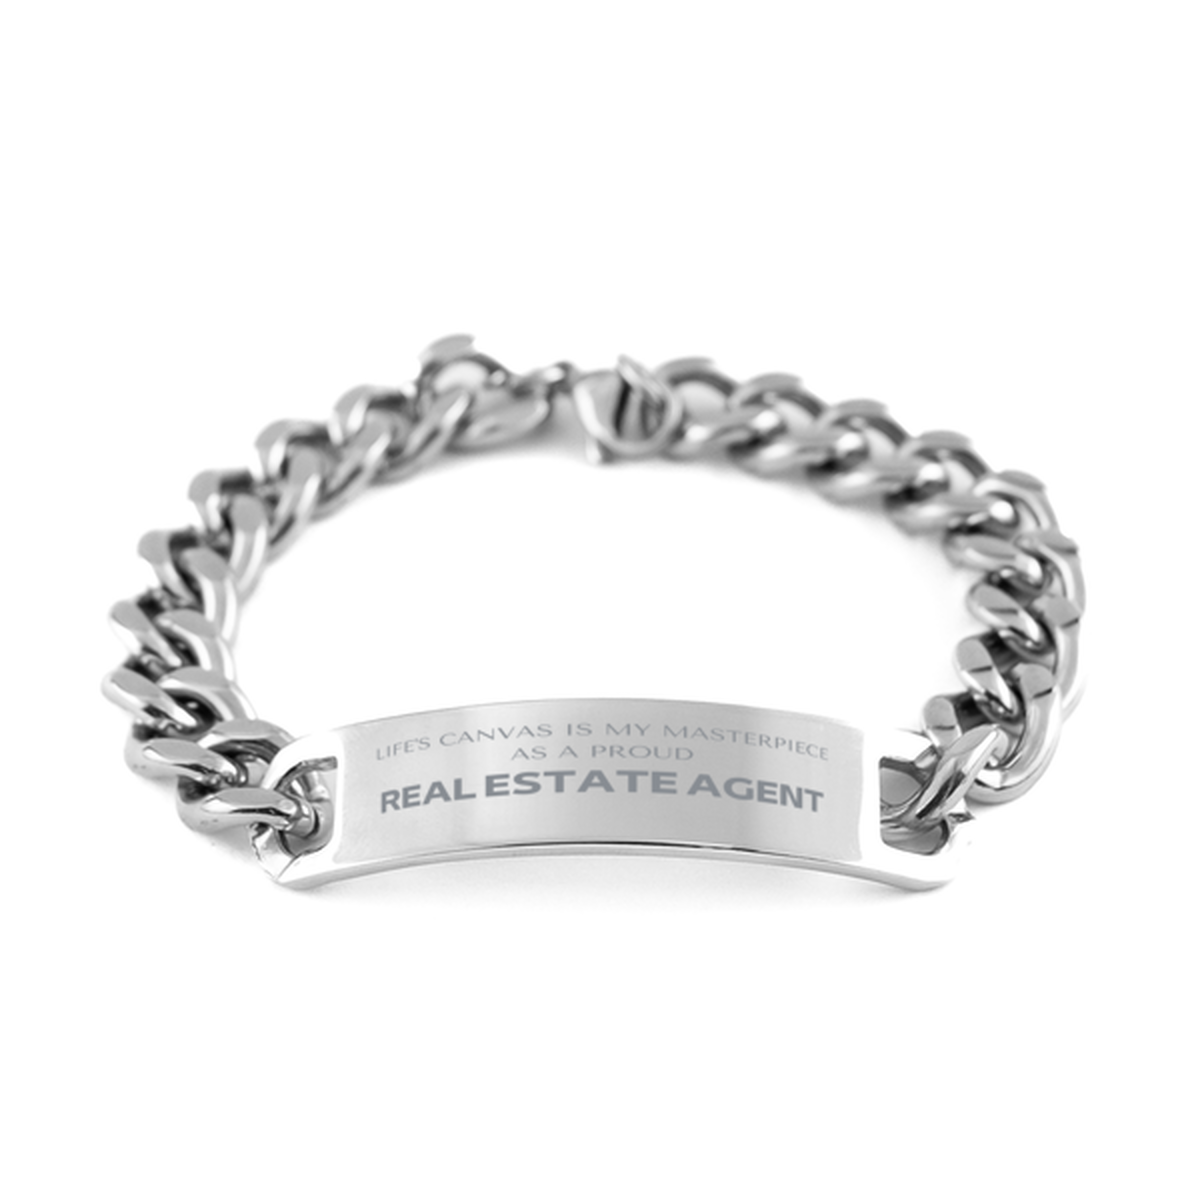 Proud Real Estate Agent Gifts, Life's canvas is my masterpiece, Epic Birthday Christmas Unique Cuban Chain Stainless Steel Bracelet For Real Estate Agent, Coworkers, Men, Women, Friends